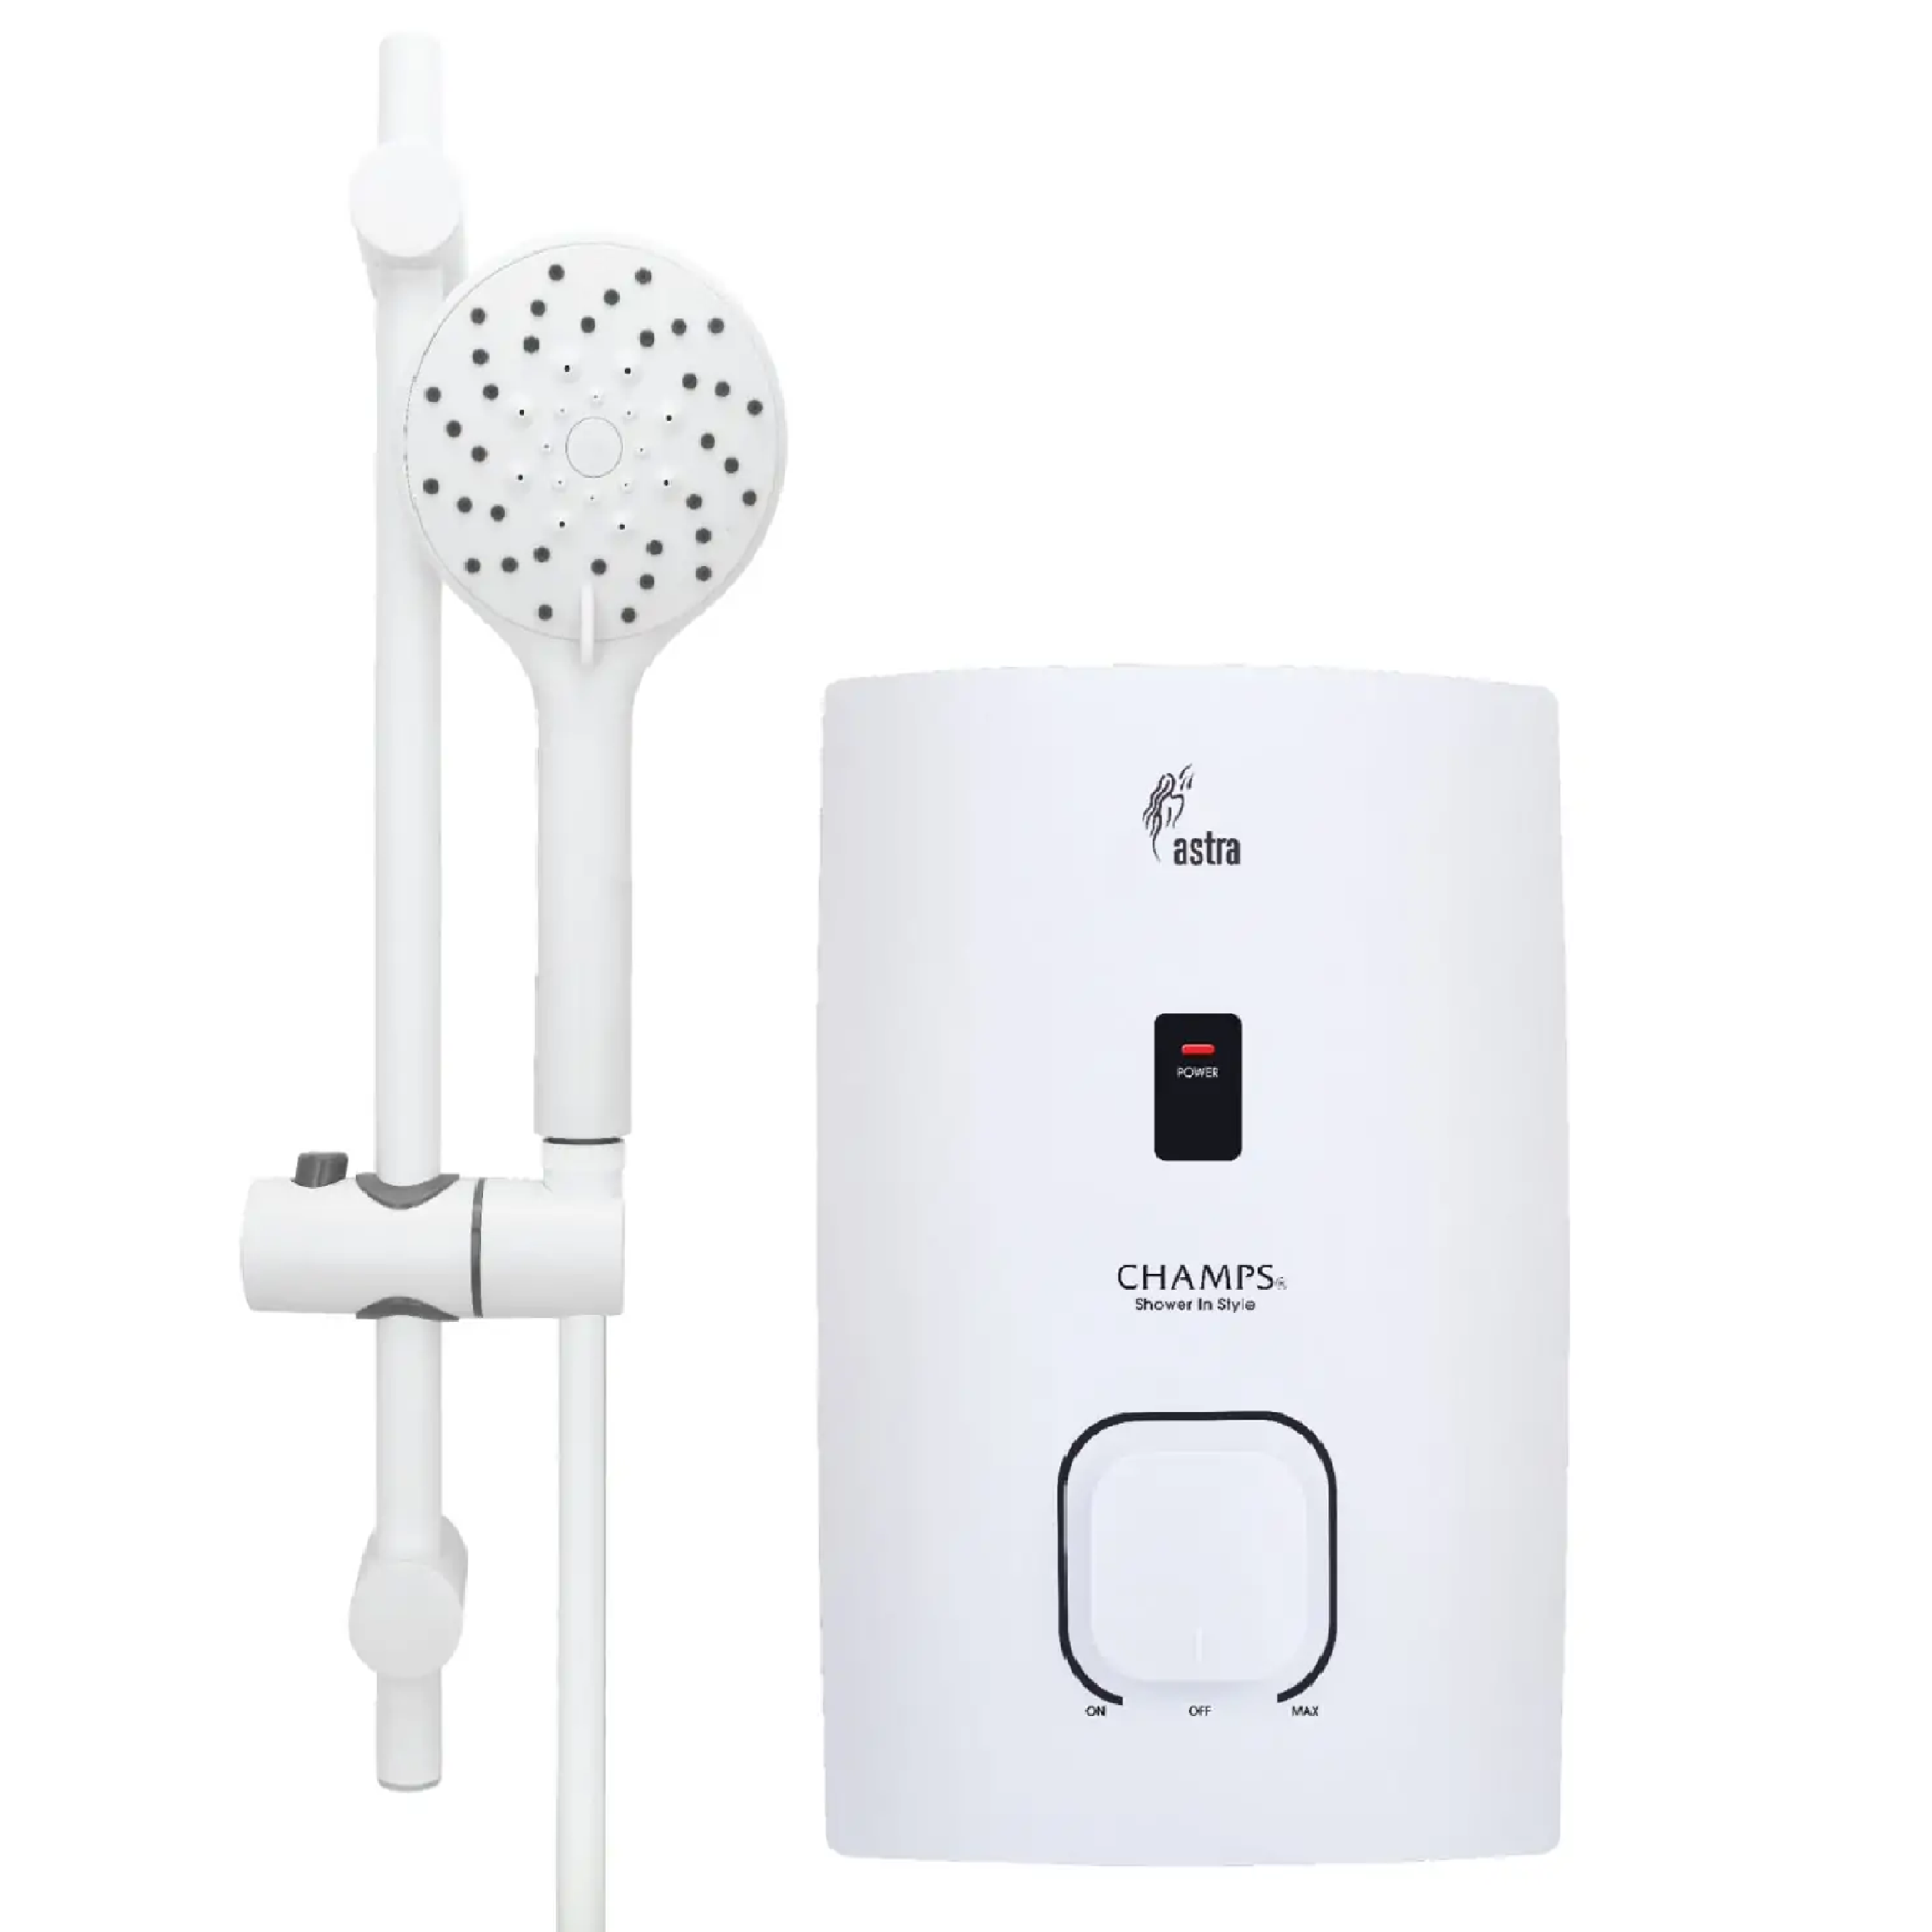 Champs ASTRA Instant Water Heater Carbon White